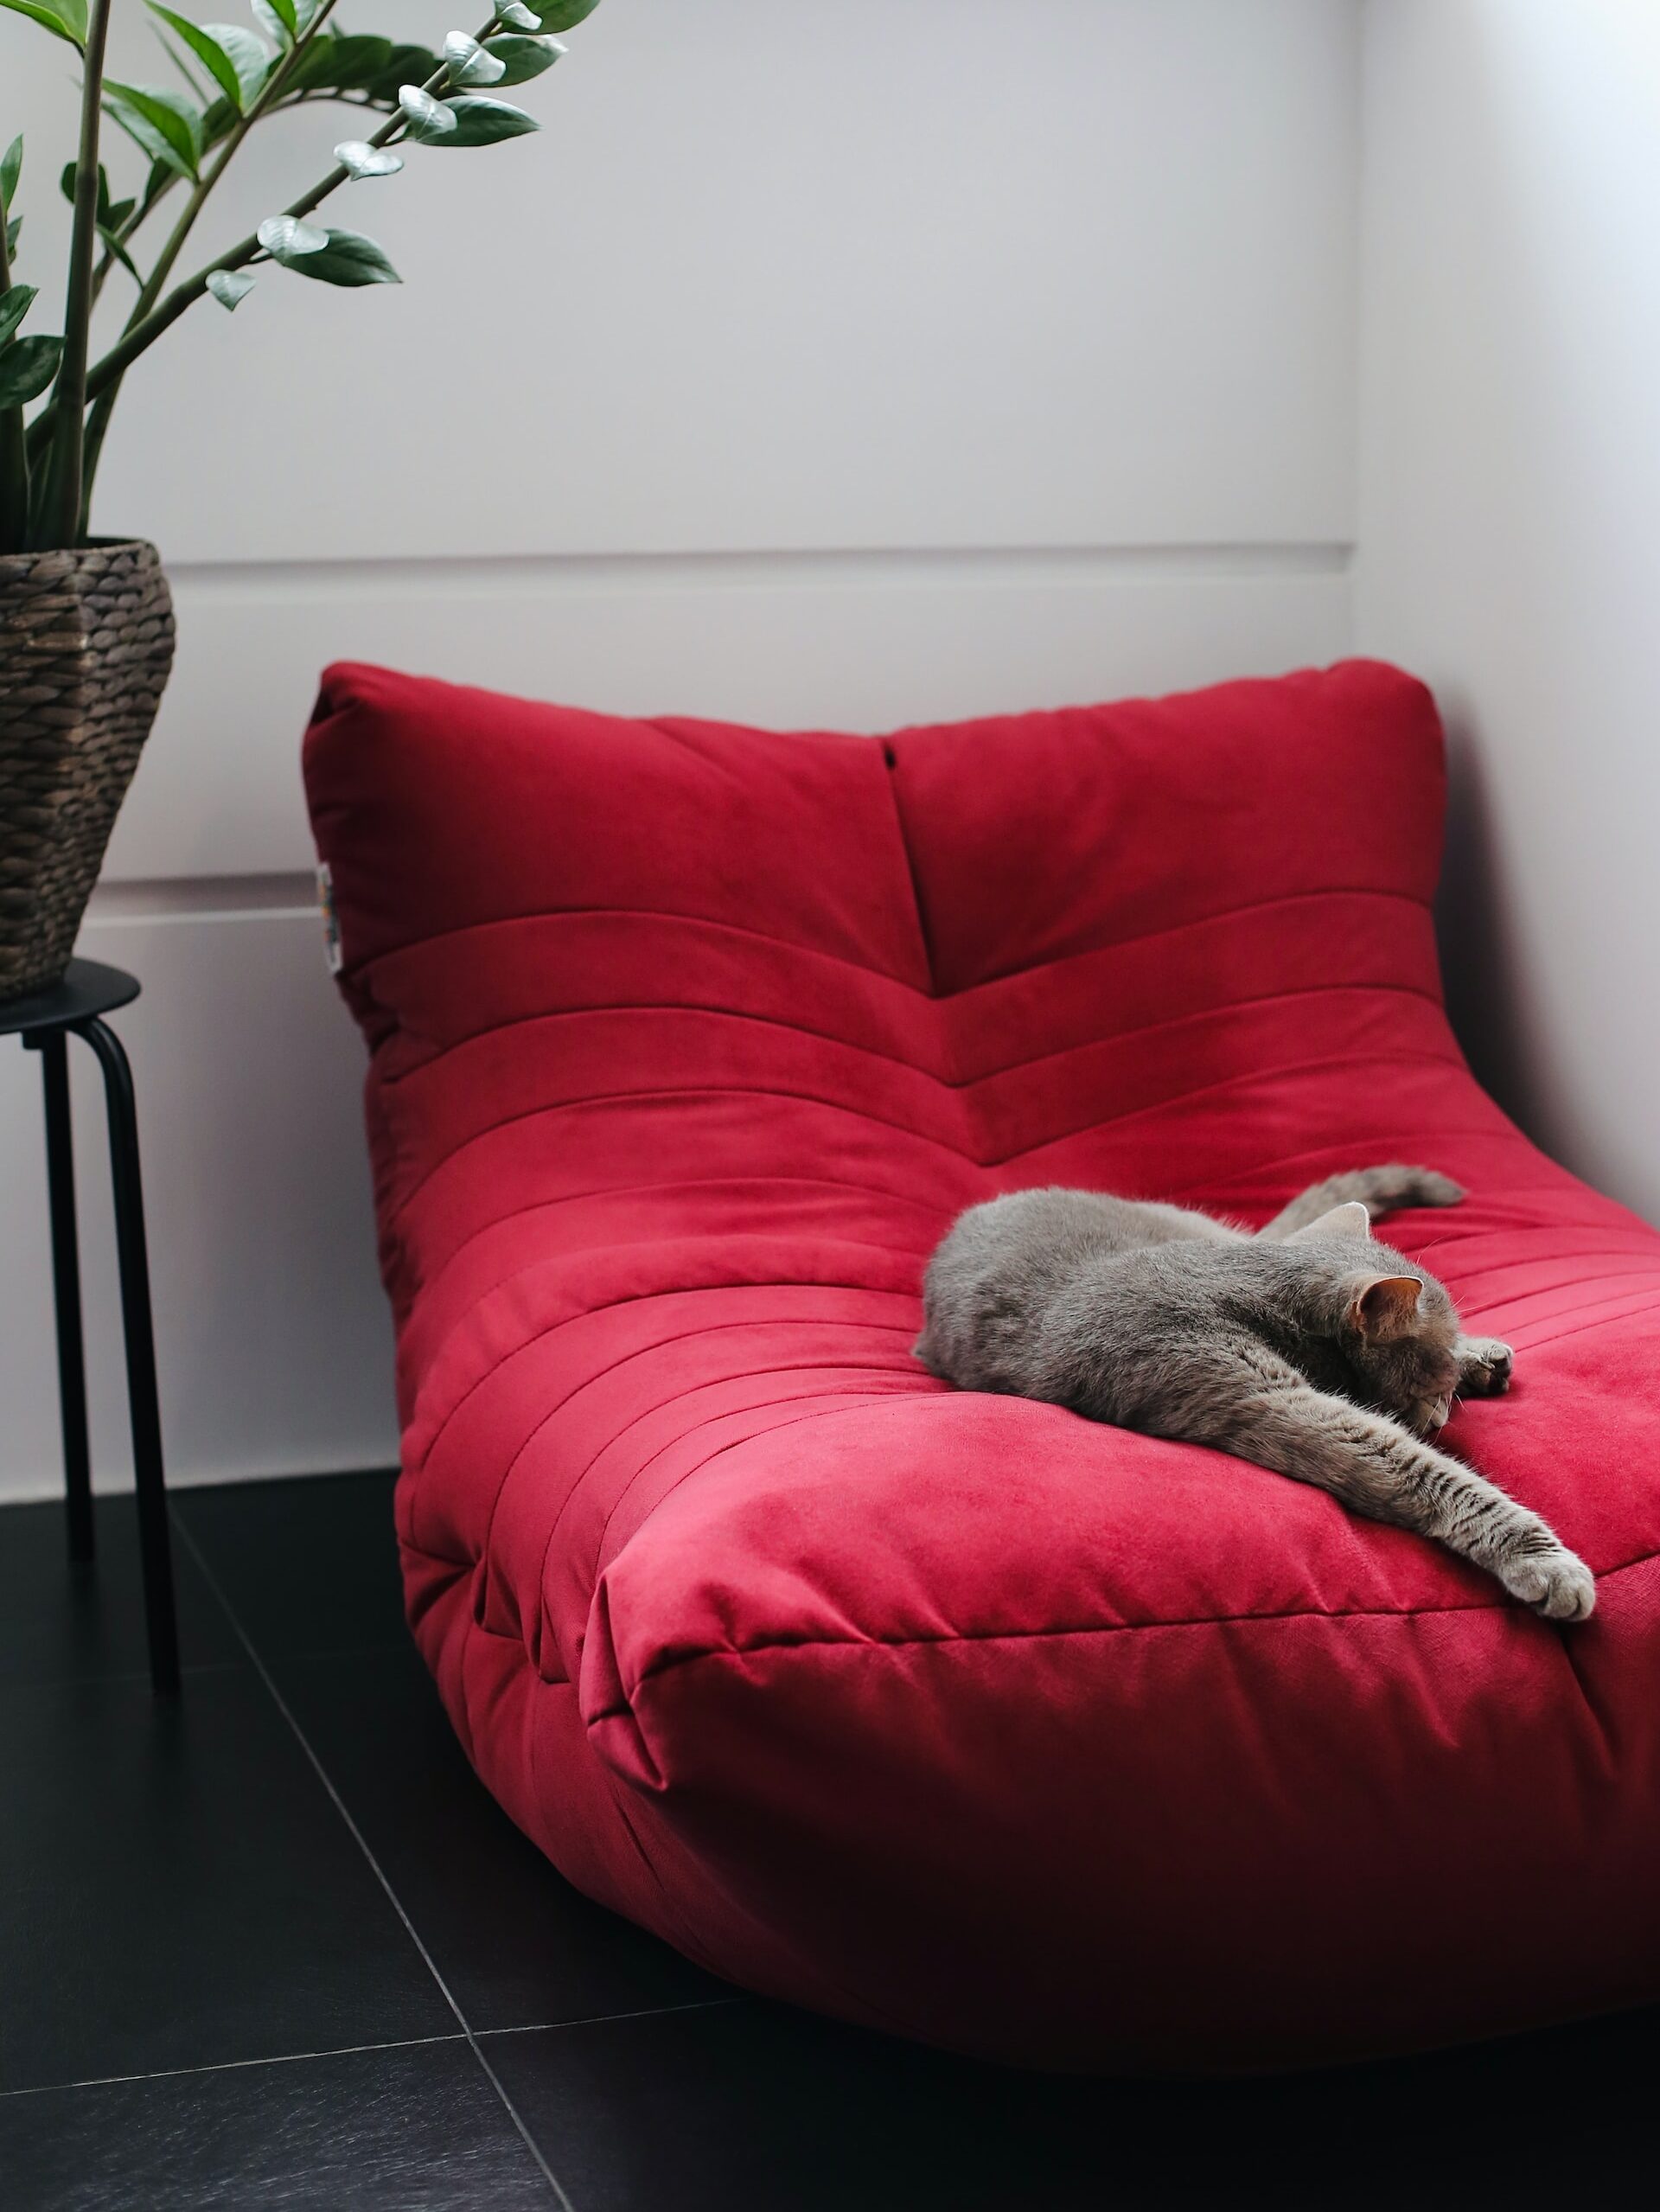 a grey cat sleeping on a cozy red chair